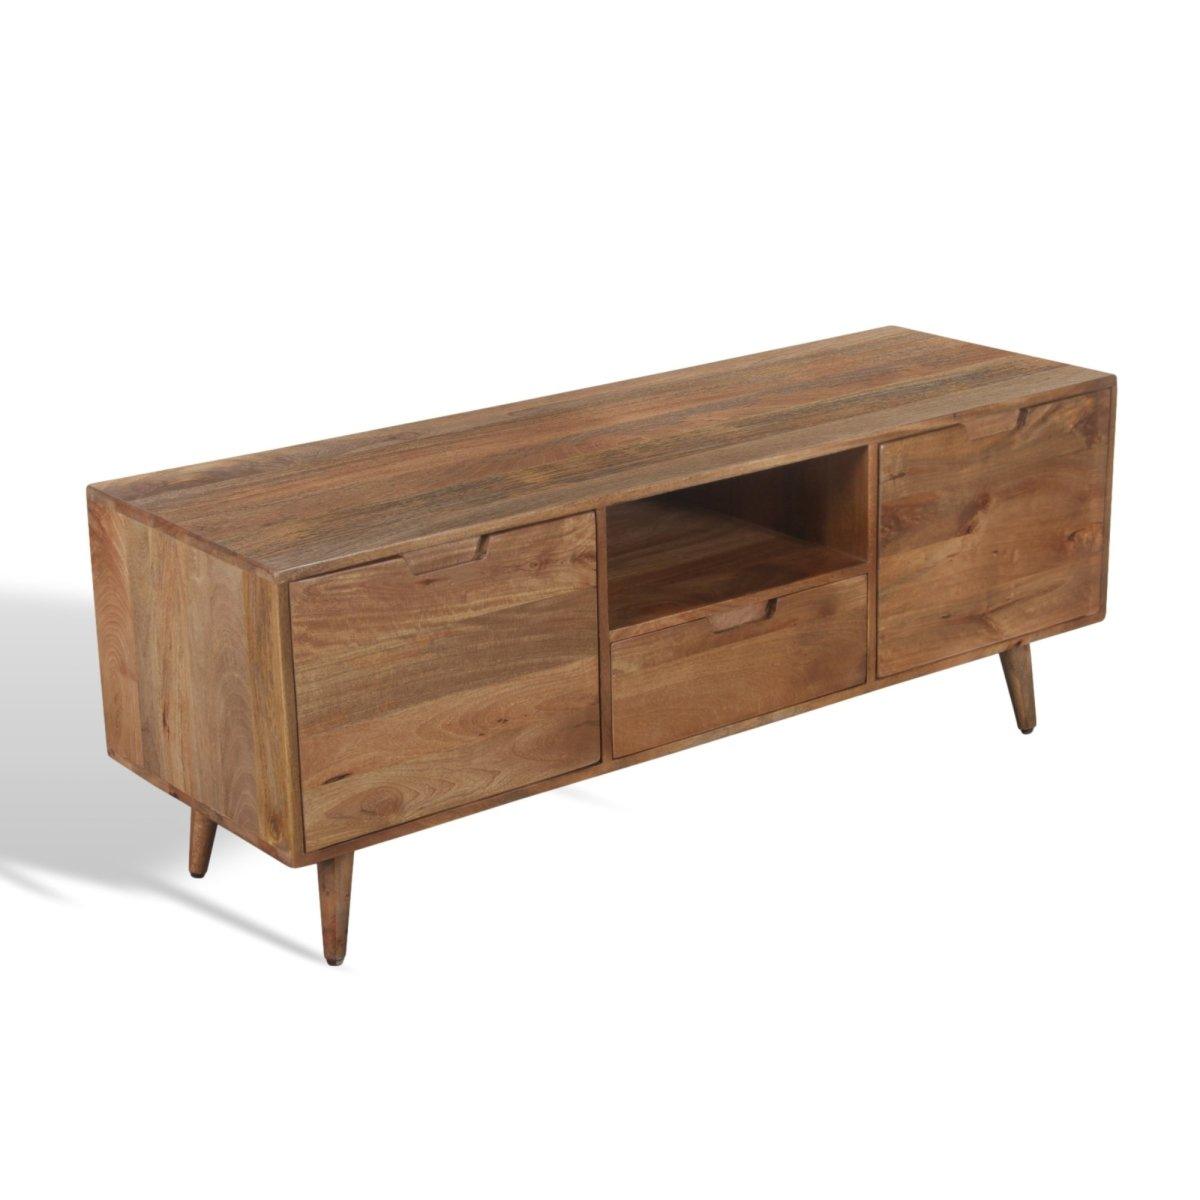 Mercury Mango Wood TV Stand - Rustic Furniture Outlet